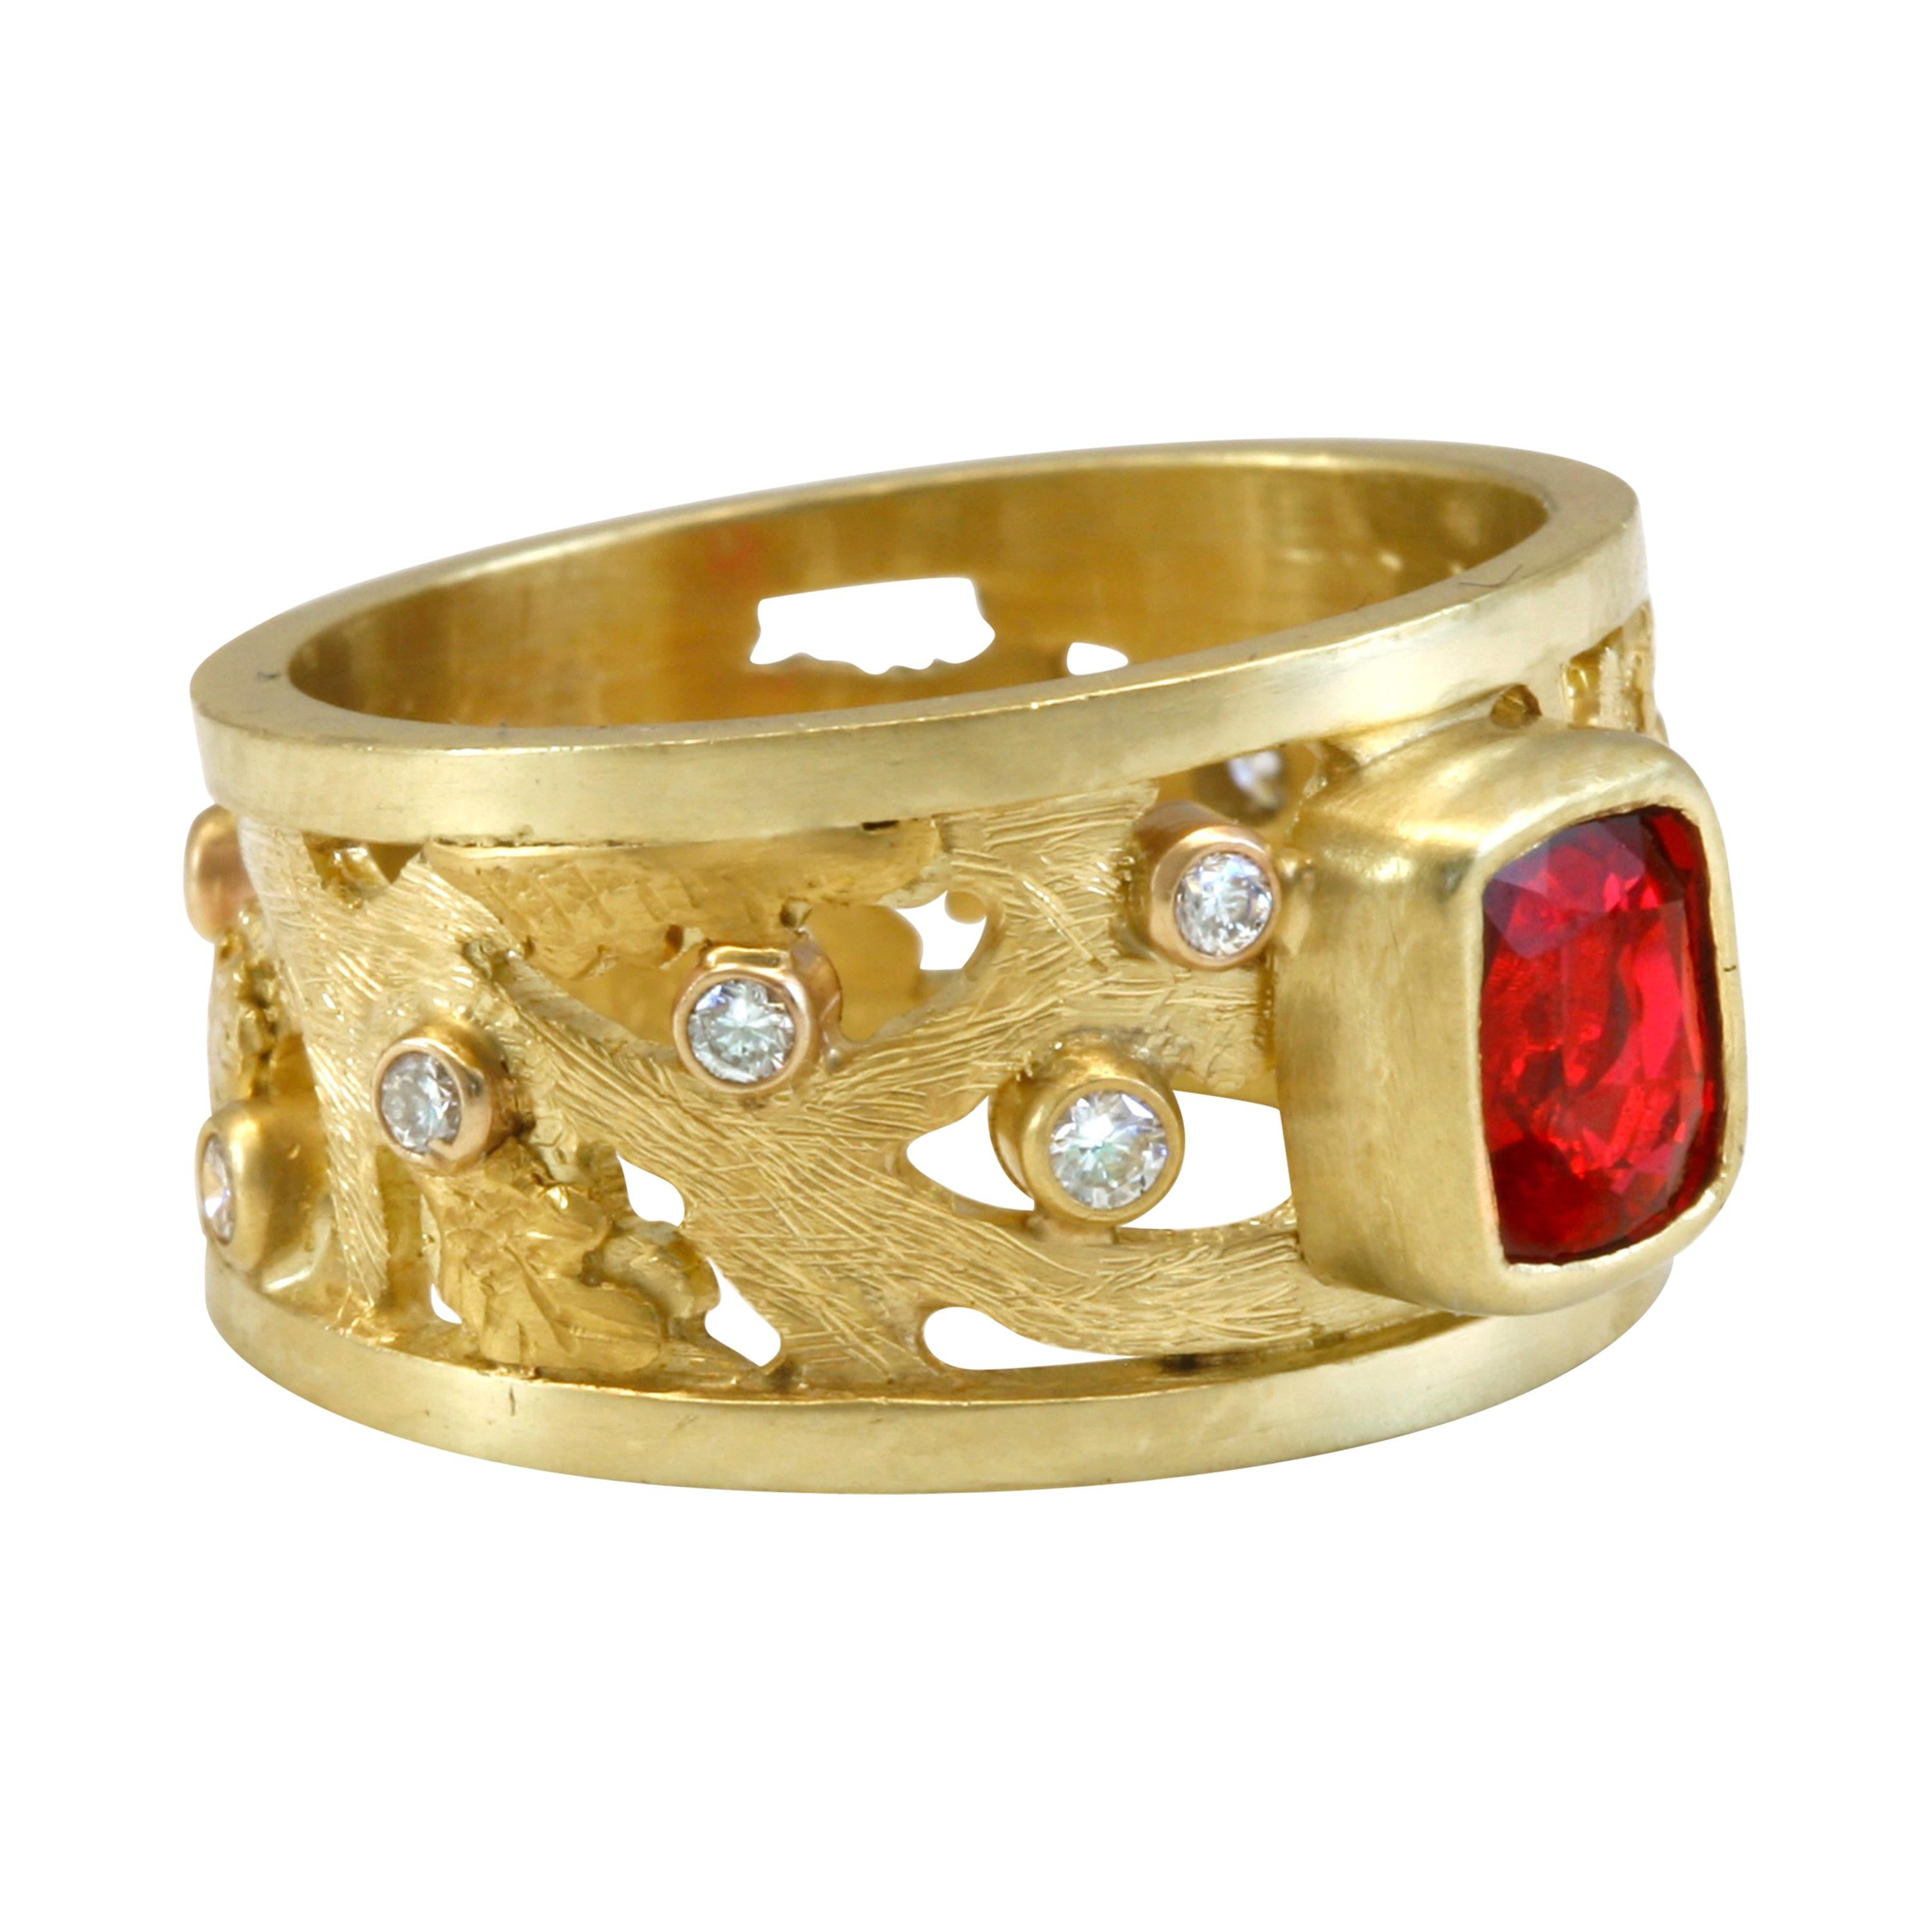 1.25 Carat Red Spinel with .27 Carat Diamonds Set in 18k Gold Scrollwork Band For Sale